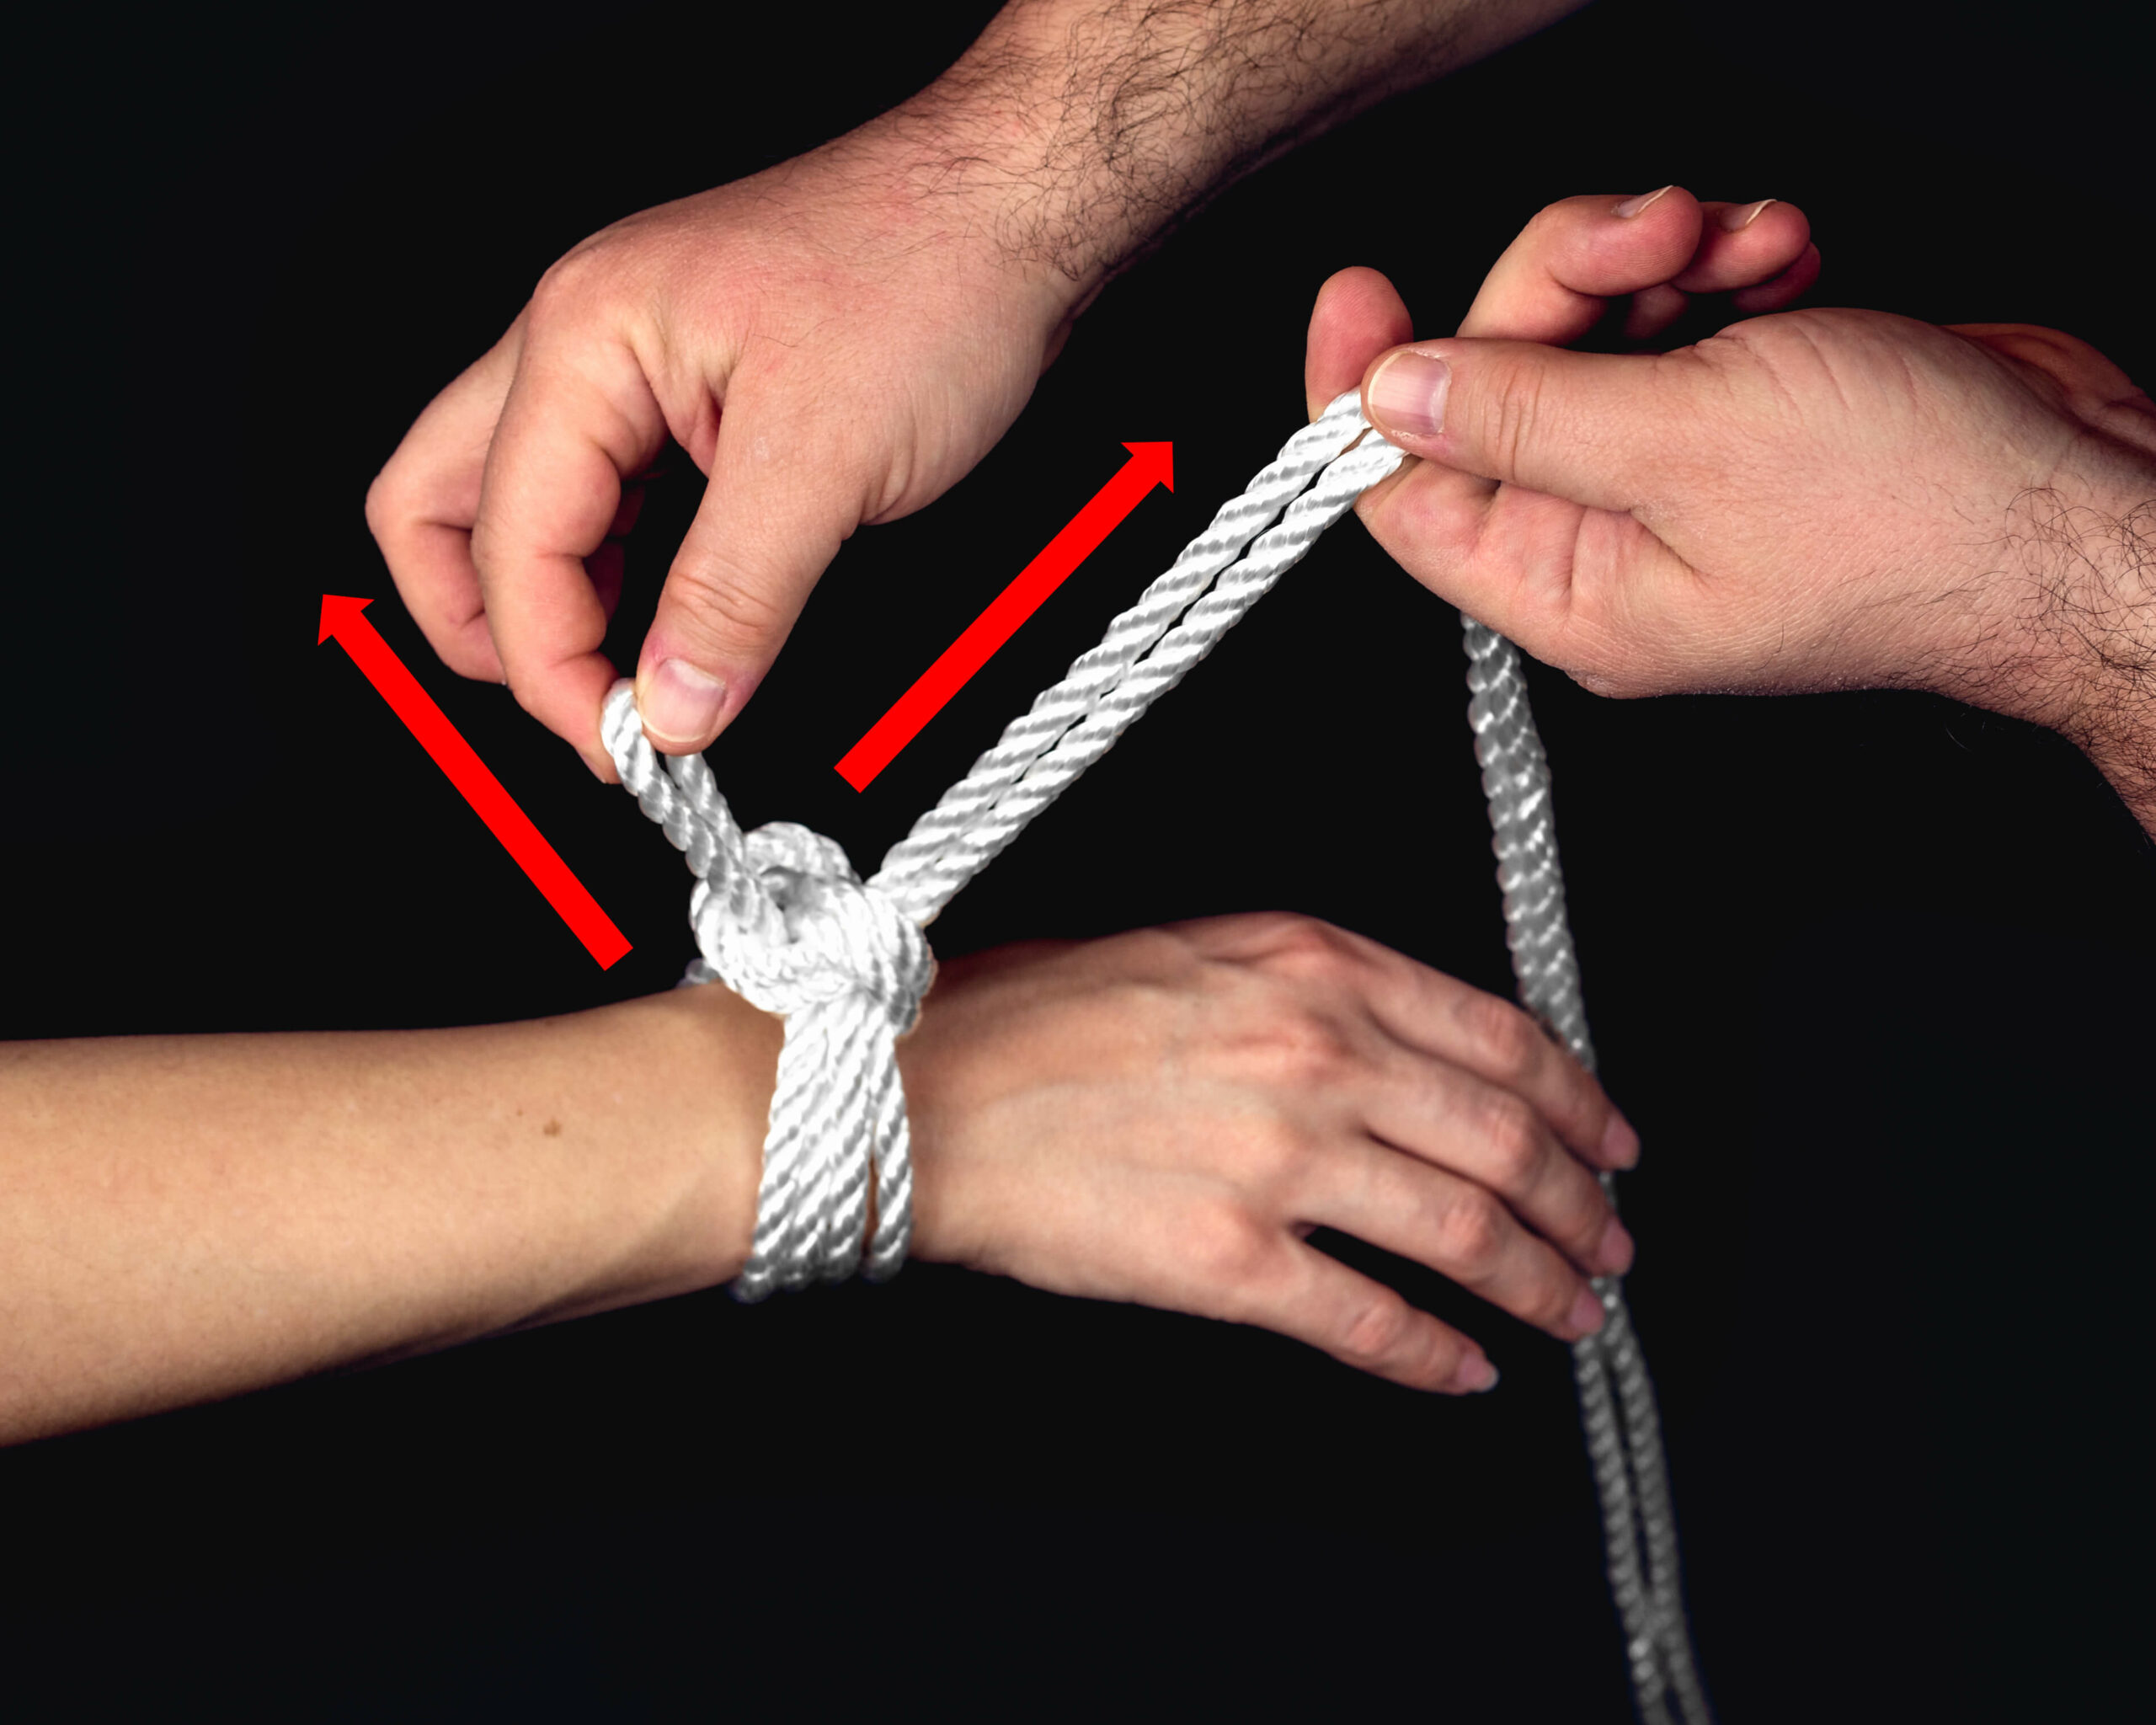 Tie A Large Rope In An Orderly Way To Hold Things Firmly. Stock